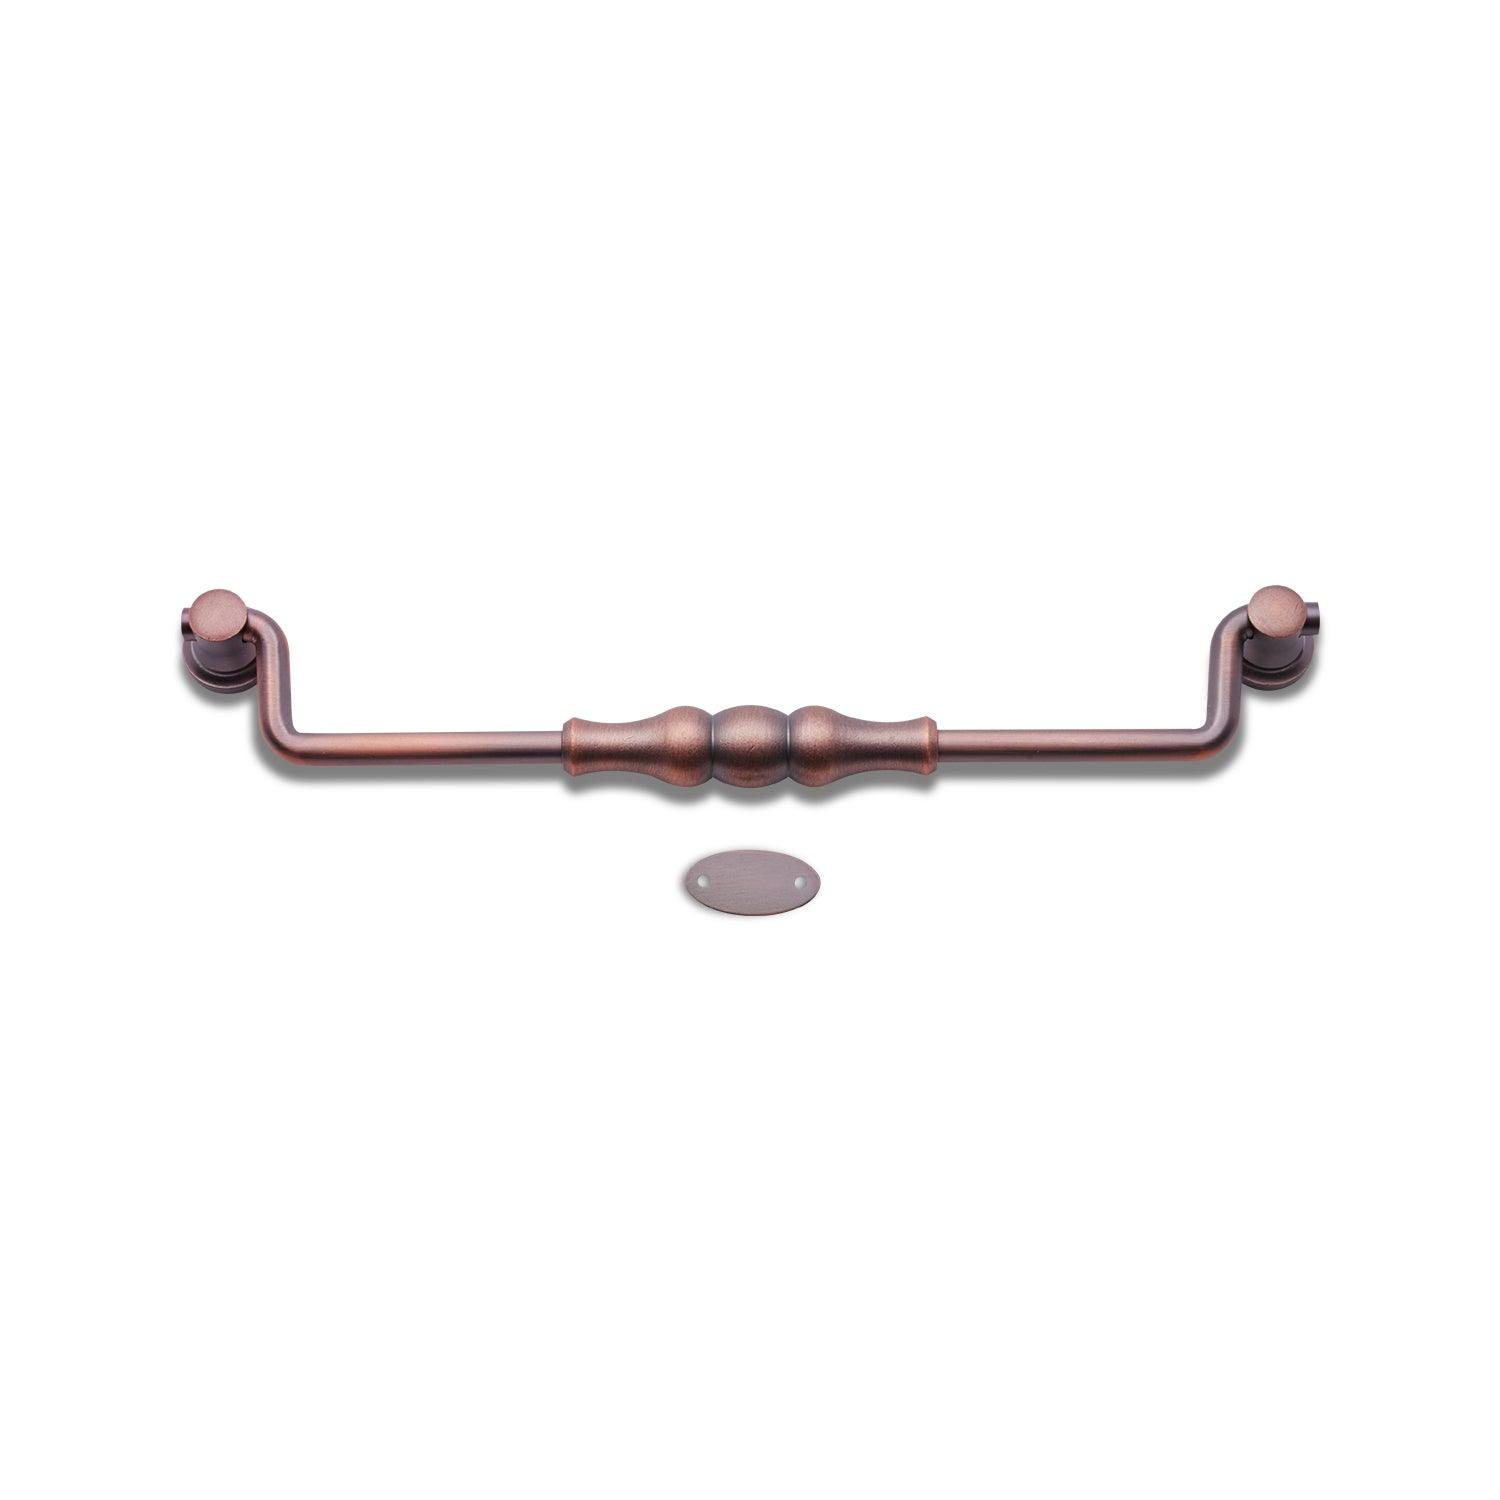 RKI - Beaded Middle Collection - Hanging Cabinet Pull - APex Hardware NY 